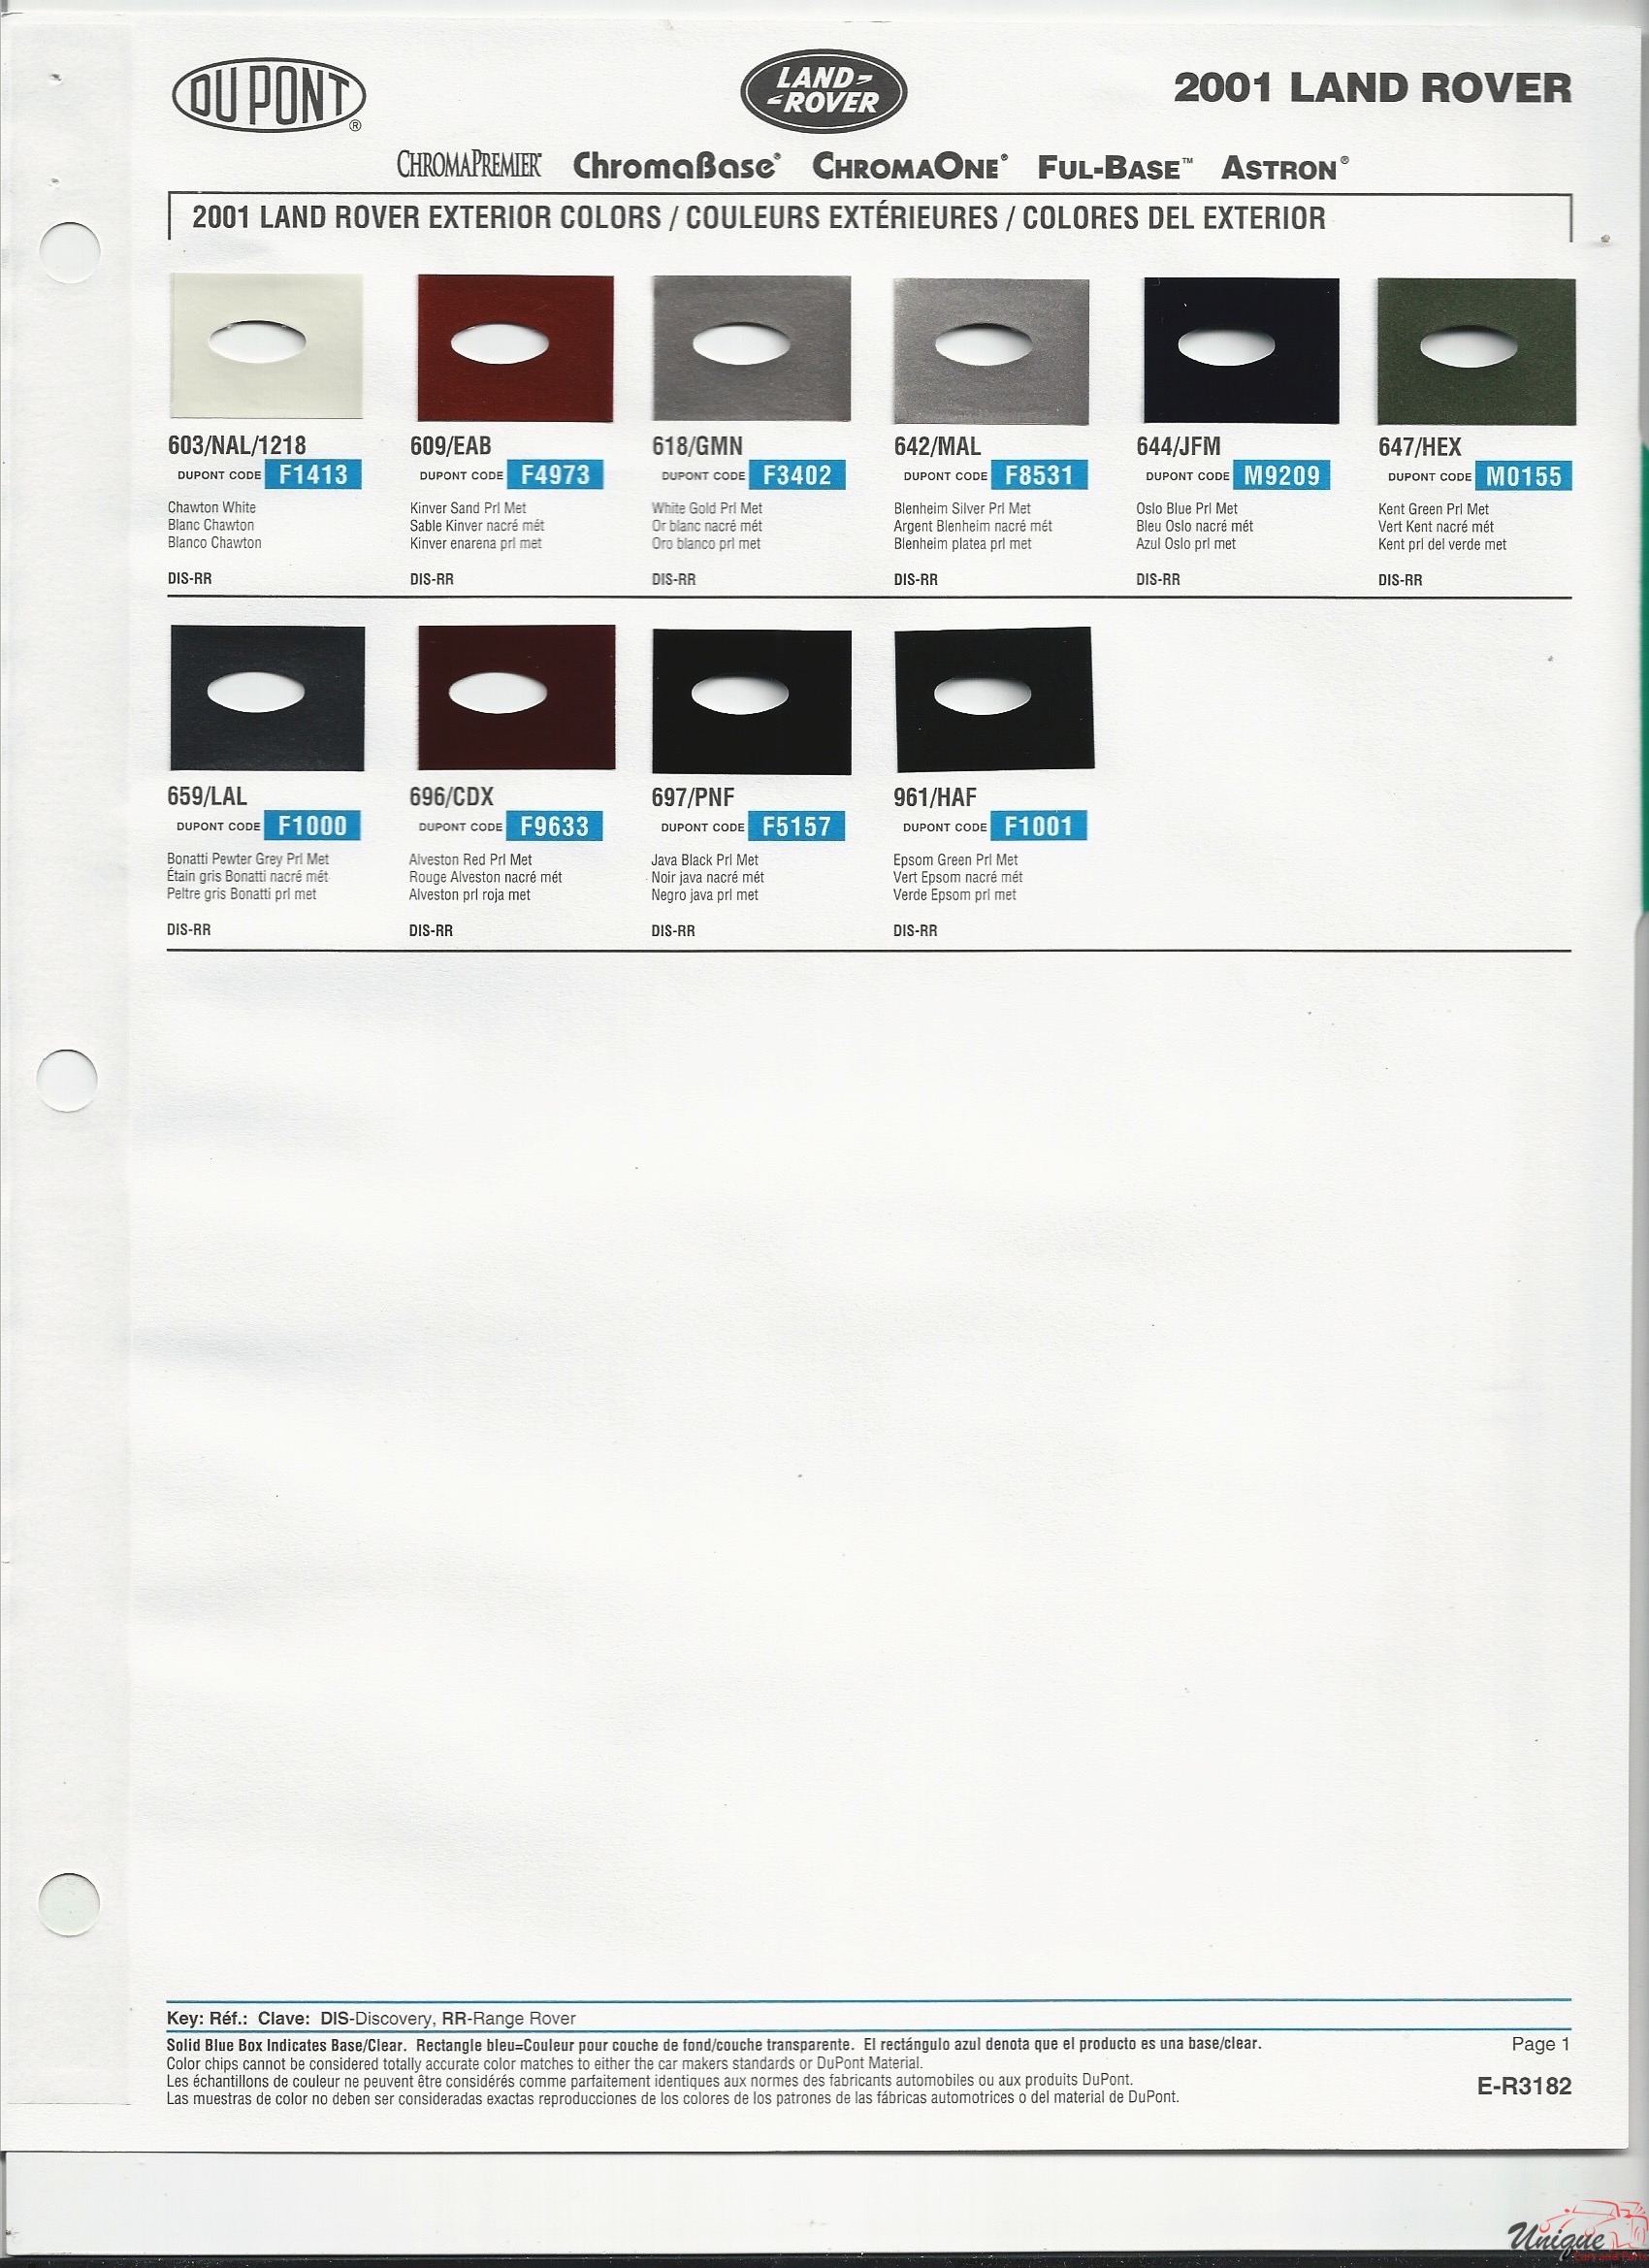 2001 Land Rover Paint Charts